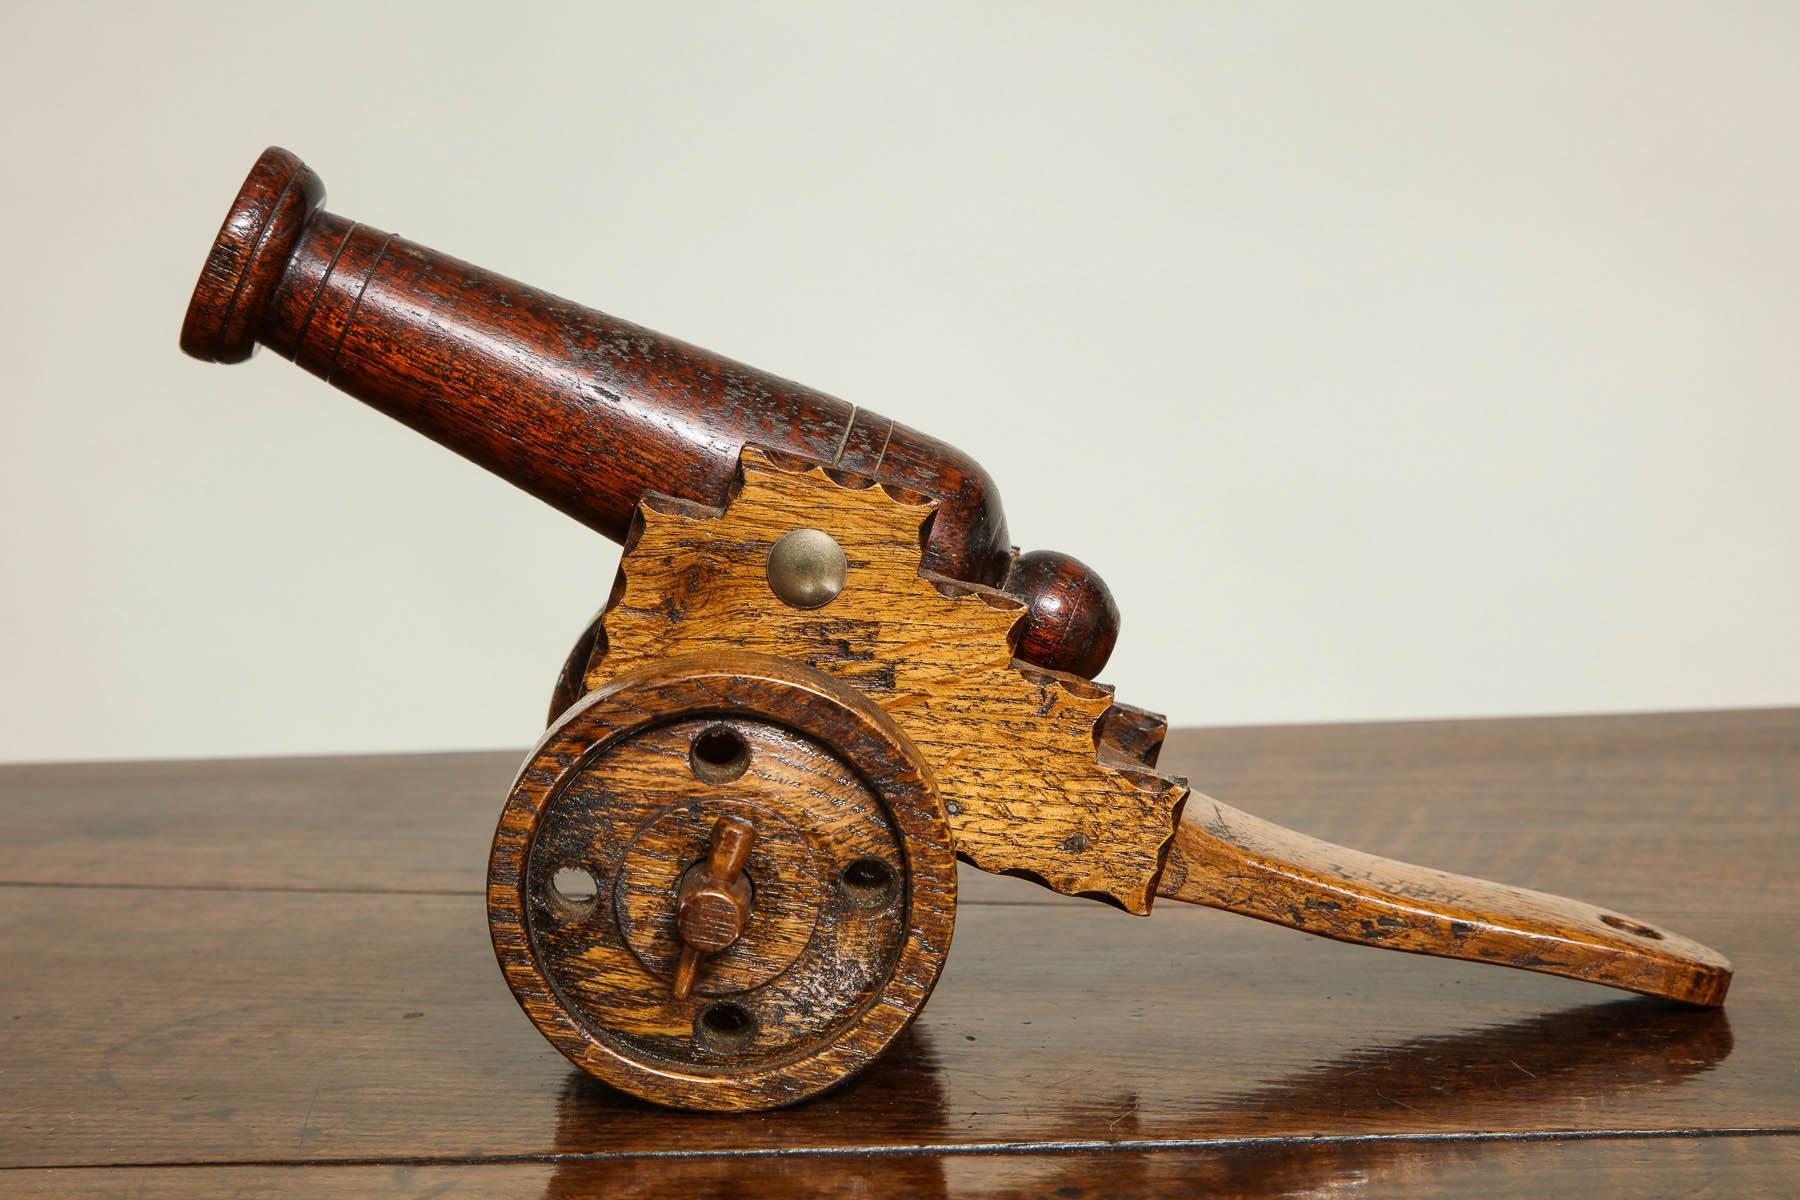 Unusual early 20th century hand modeled cannon, the turned mahogany barrel with flared mouth, the oak carriage with turned wheels held by wedges and on shaped frame, the whole with pleasing color and good proportions.